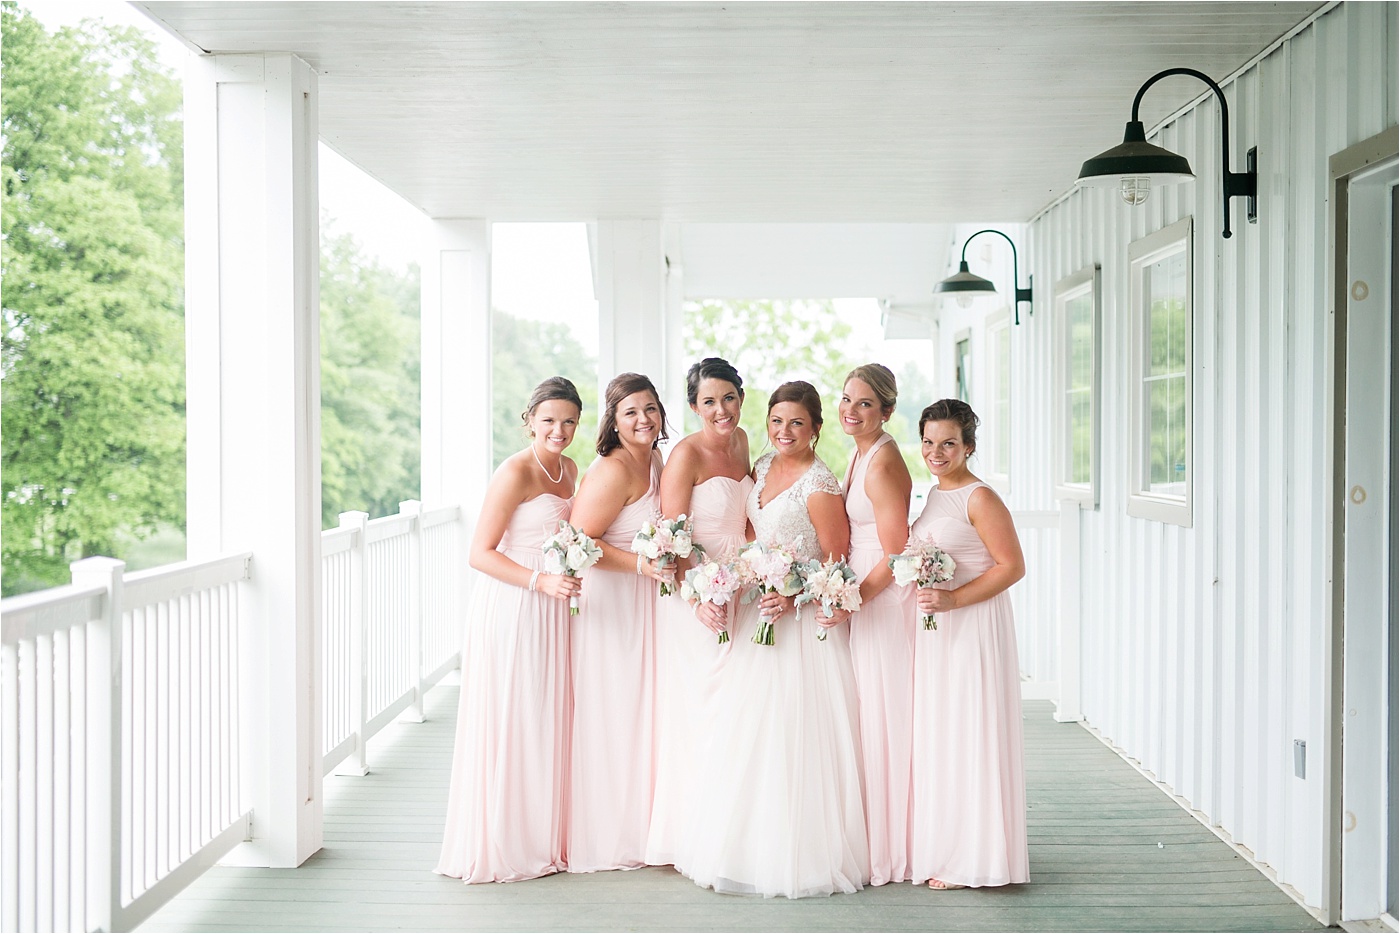 A Blush Outdoor wedding at Irongate Equestrian | KariMe Photography_0048